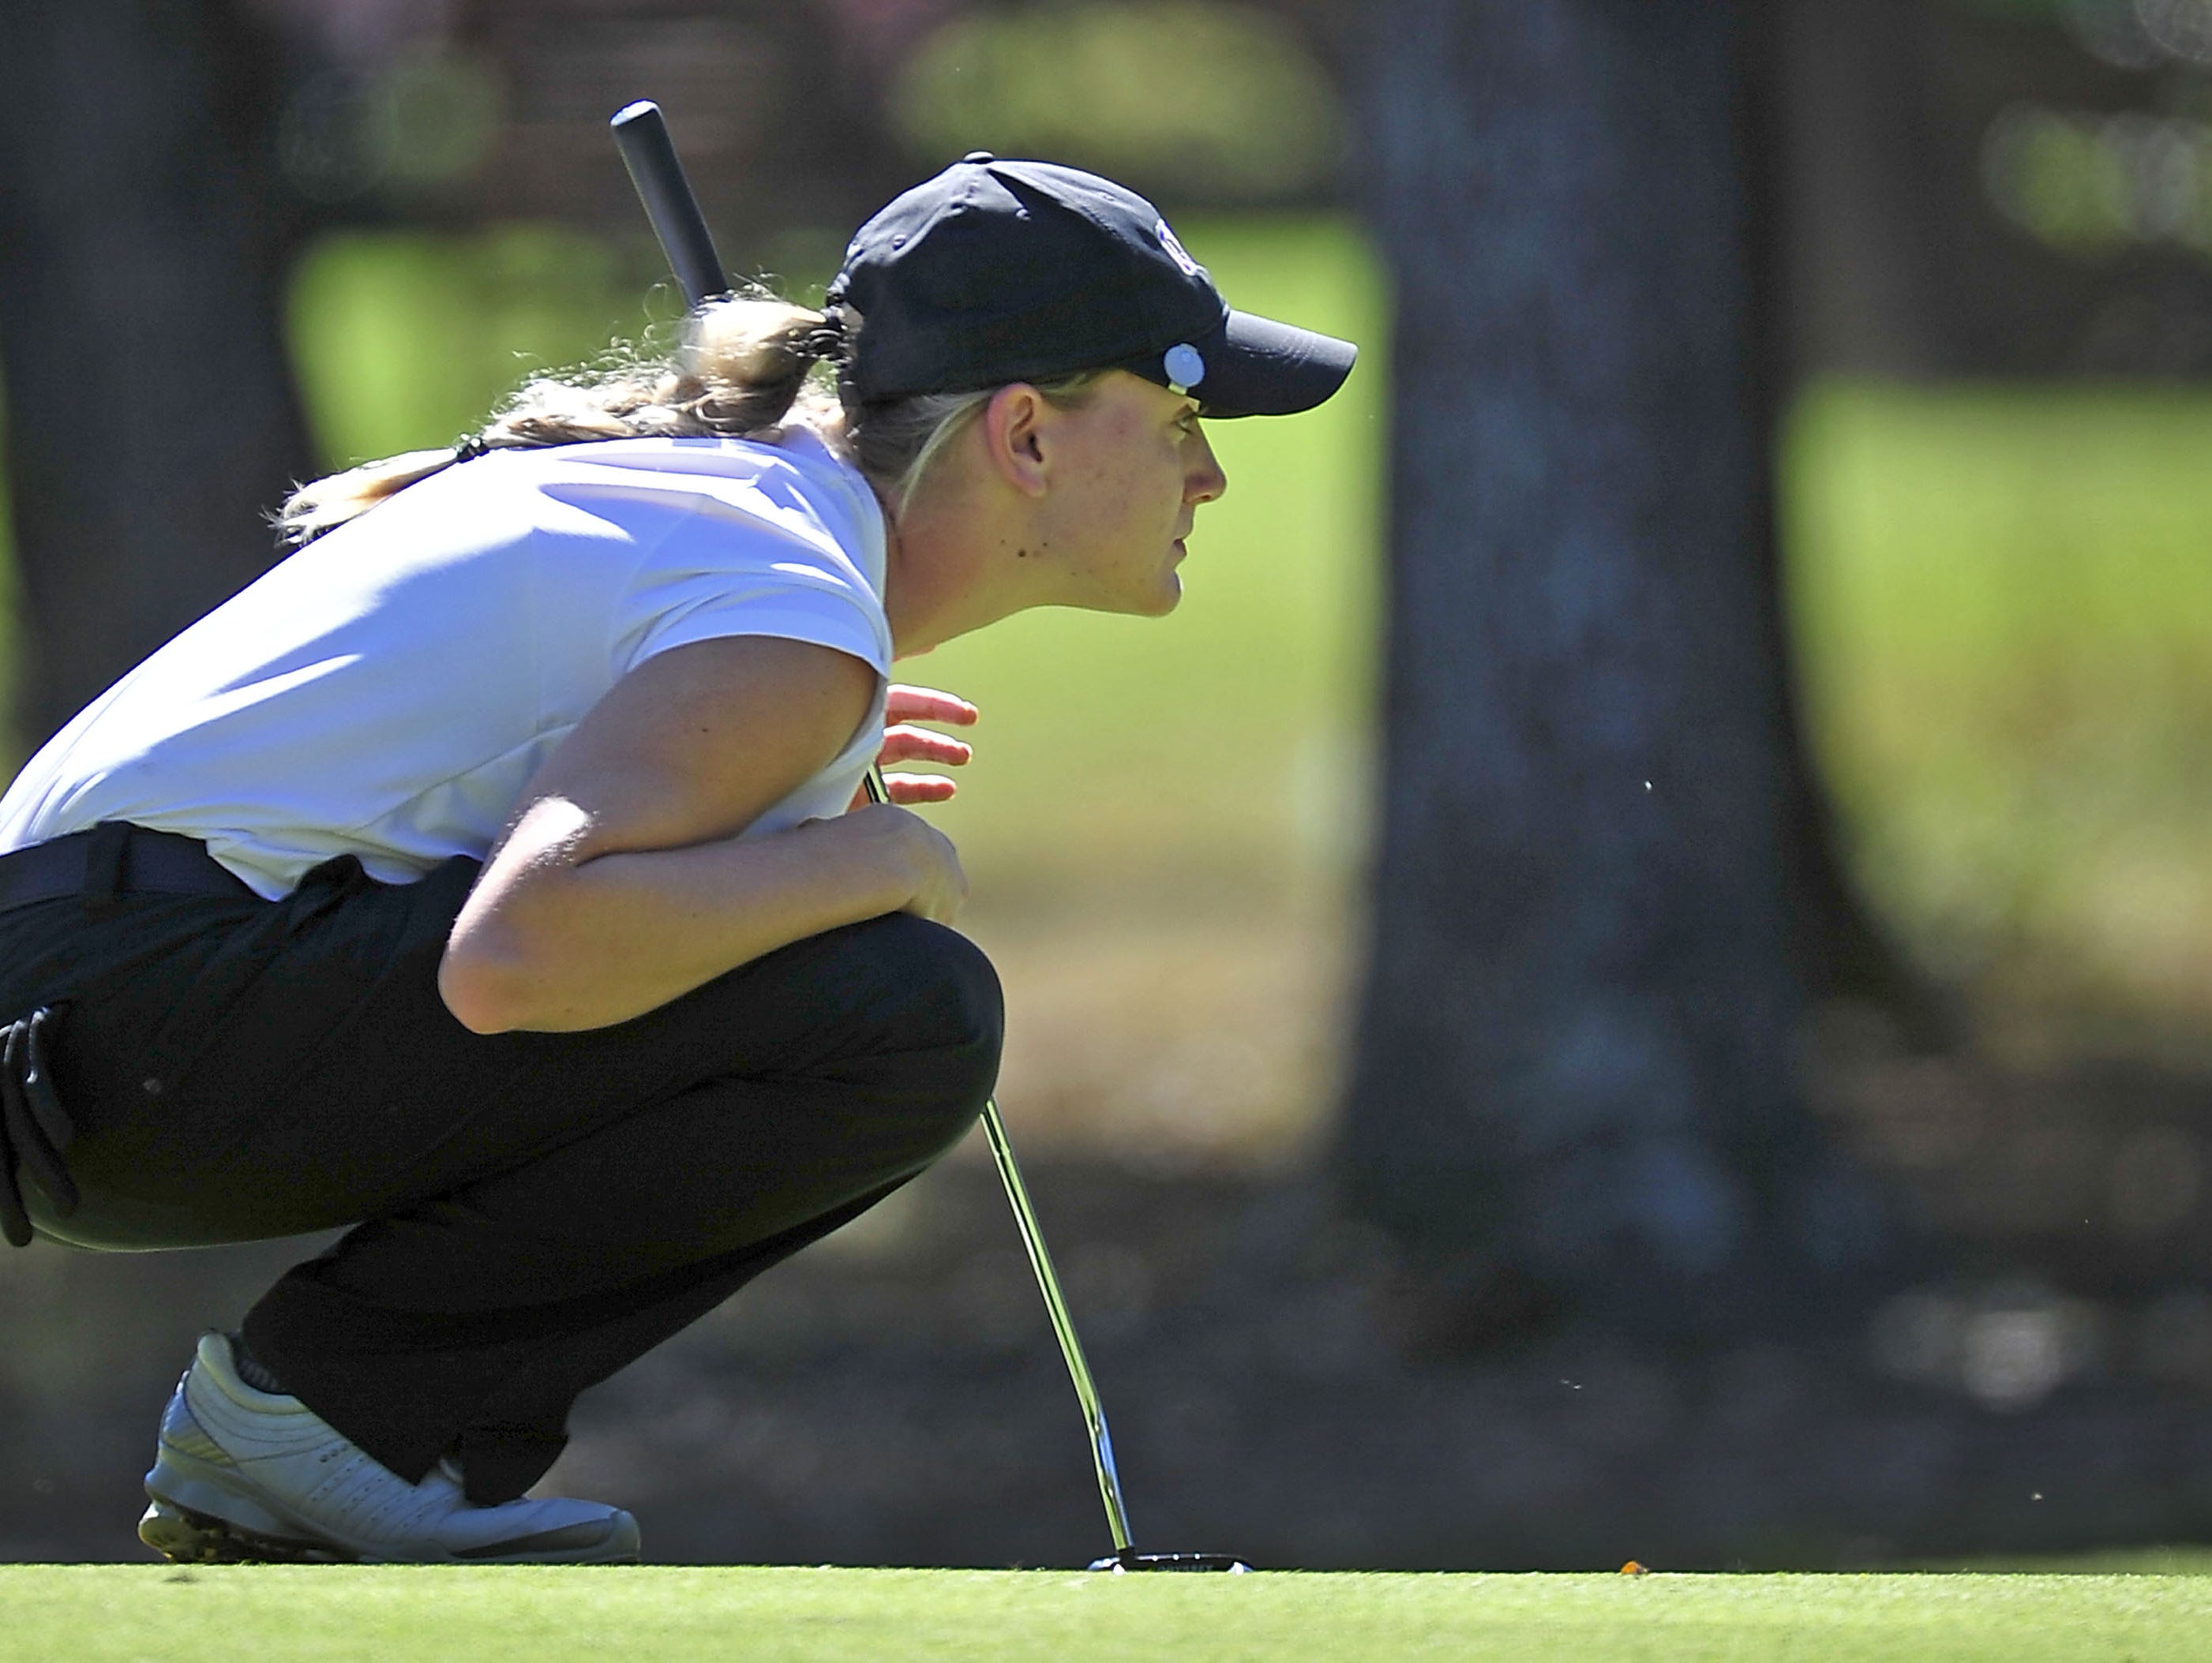 CPA's Siarra Stout won back-to-back Class A/AA state golf titles.